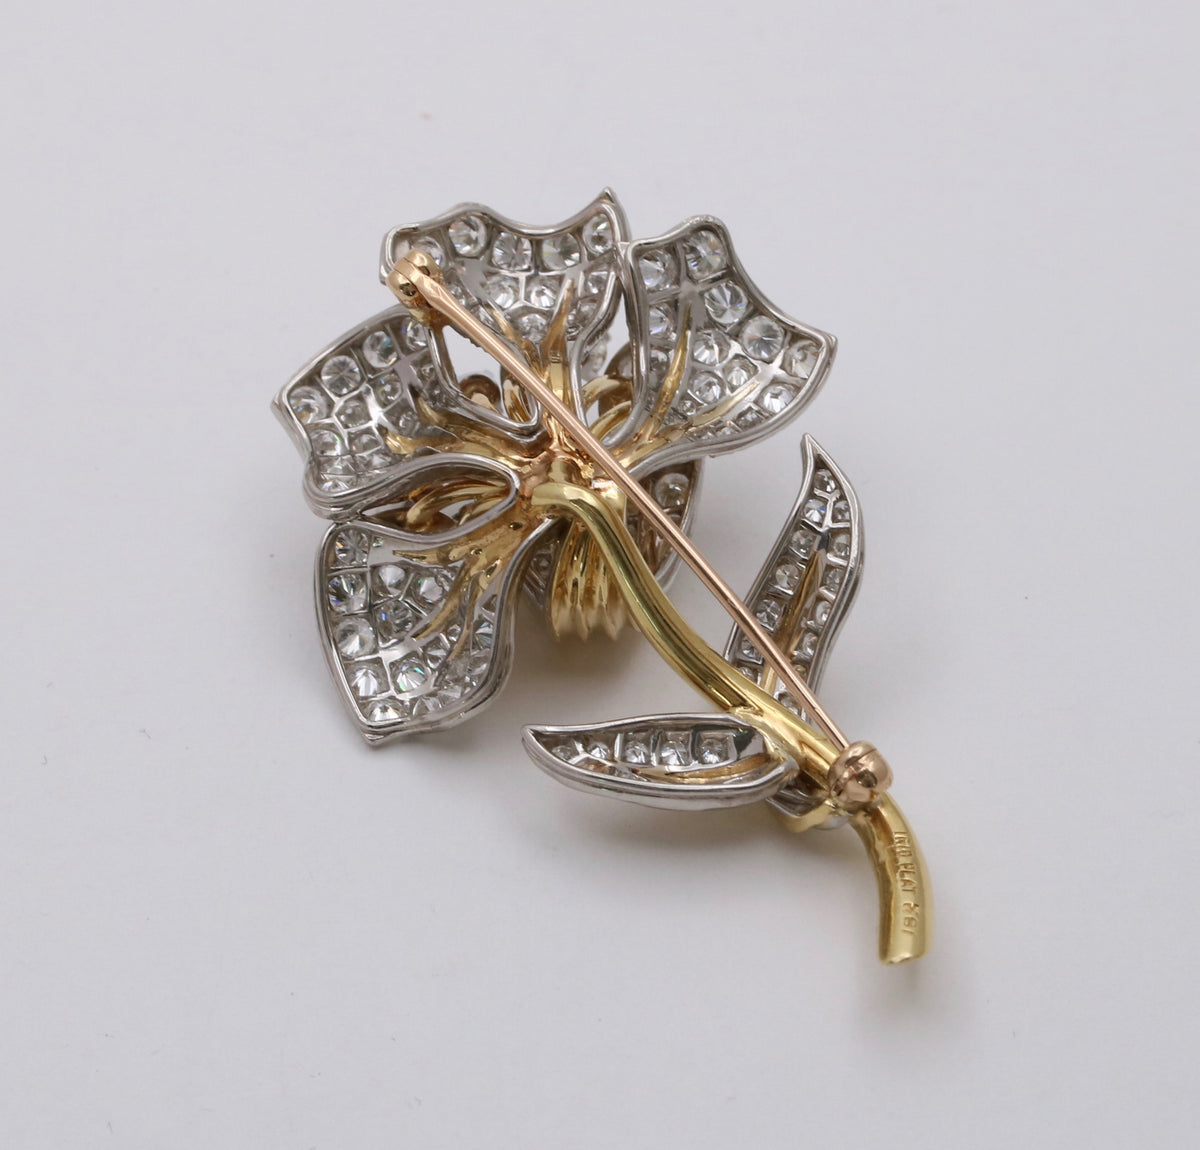 Alpha & Omega Jewelry Large Vintage 18K Gold and 1 Carat Diamond Forget-Me-Not Flower Brooch Clip, Retro Pin